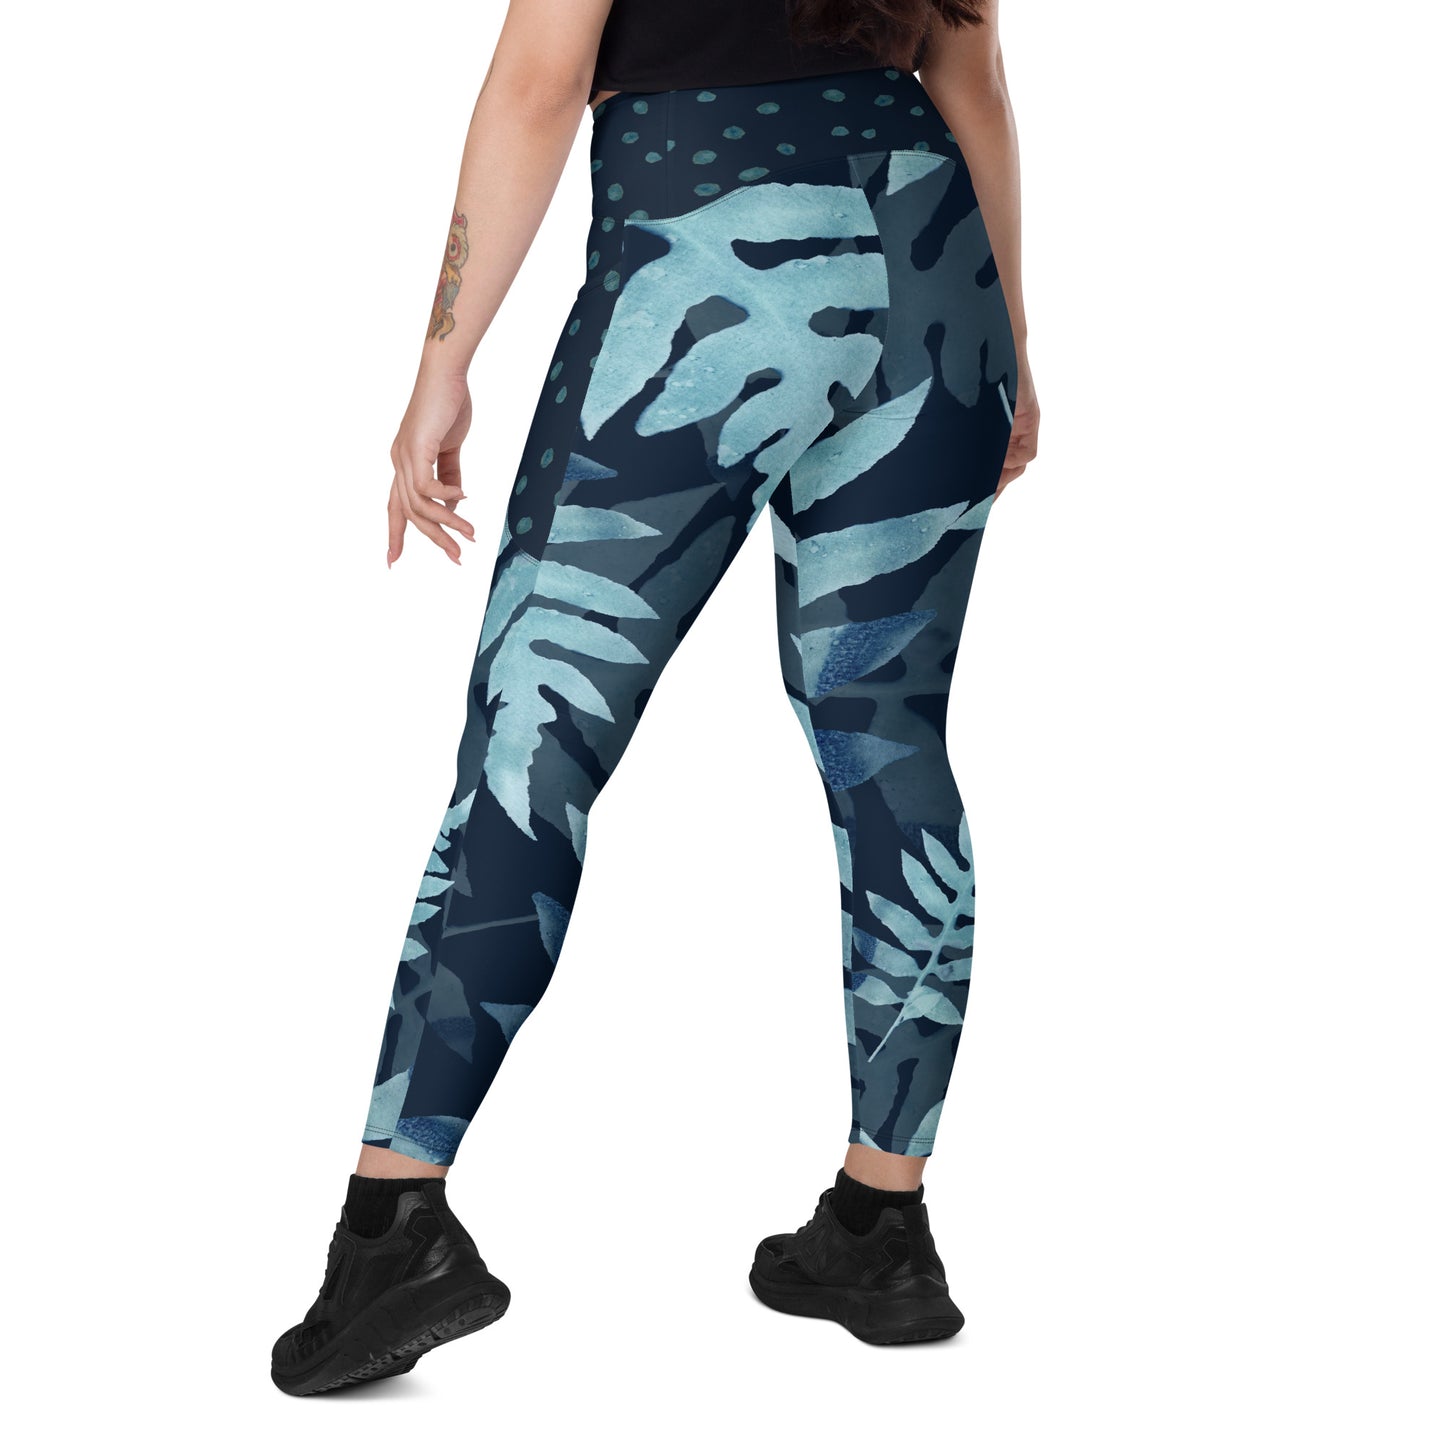 Navy Falling Ferns Leggings with pockets